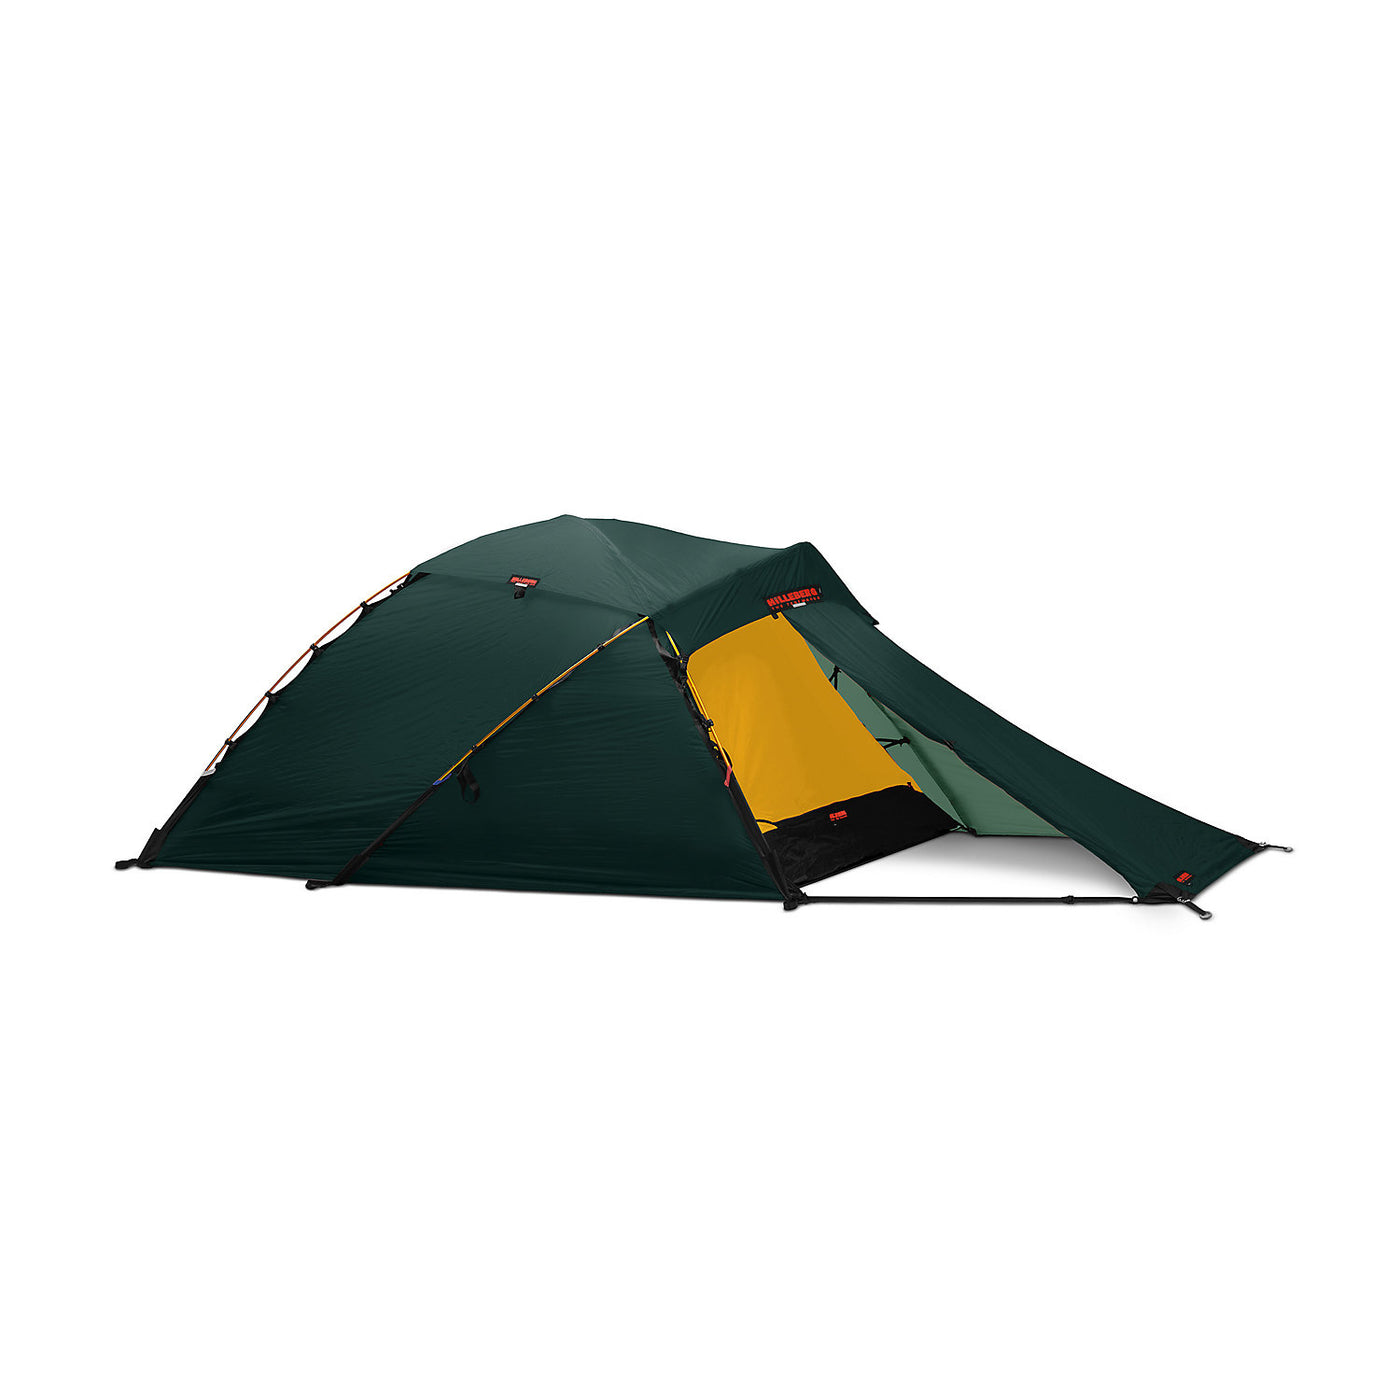 Jannu 2 Person Tent